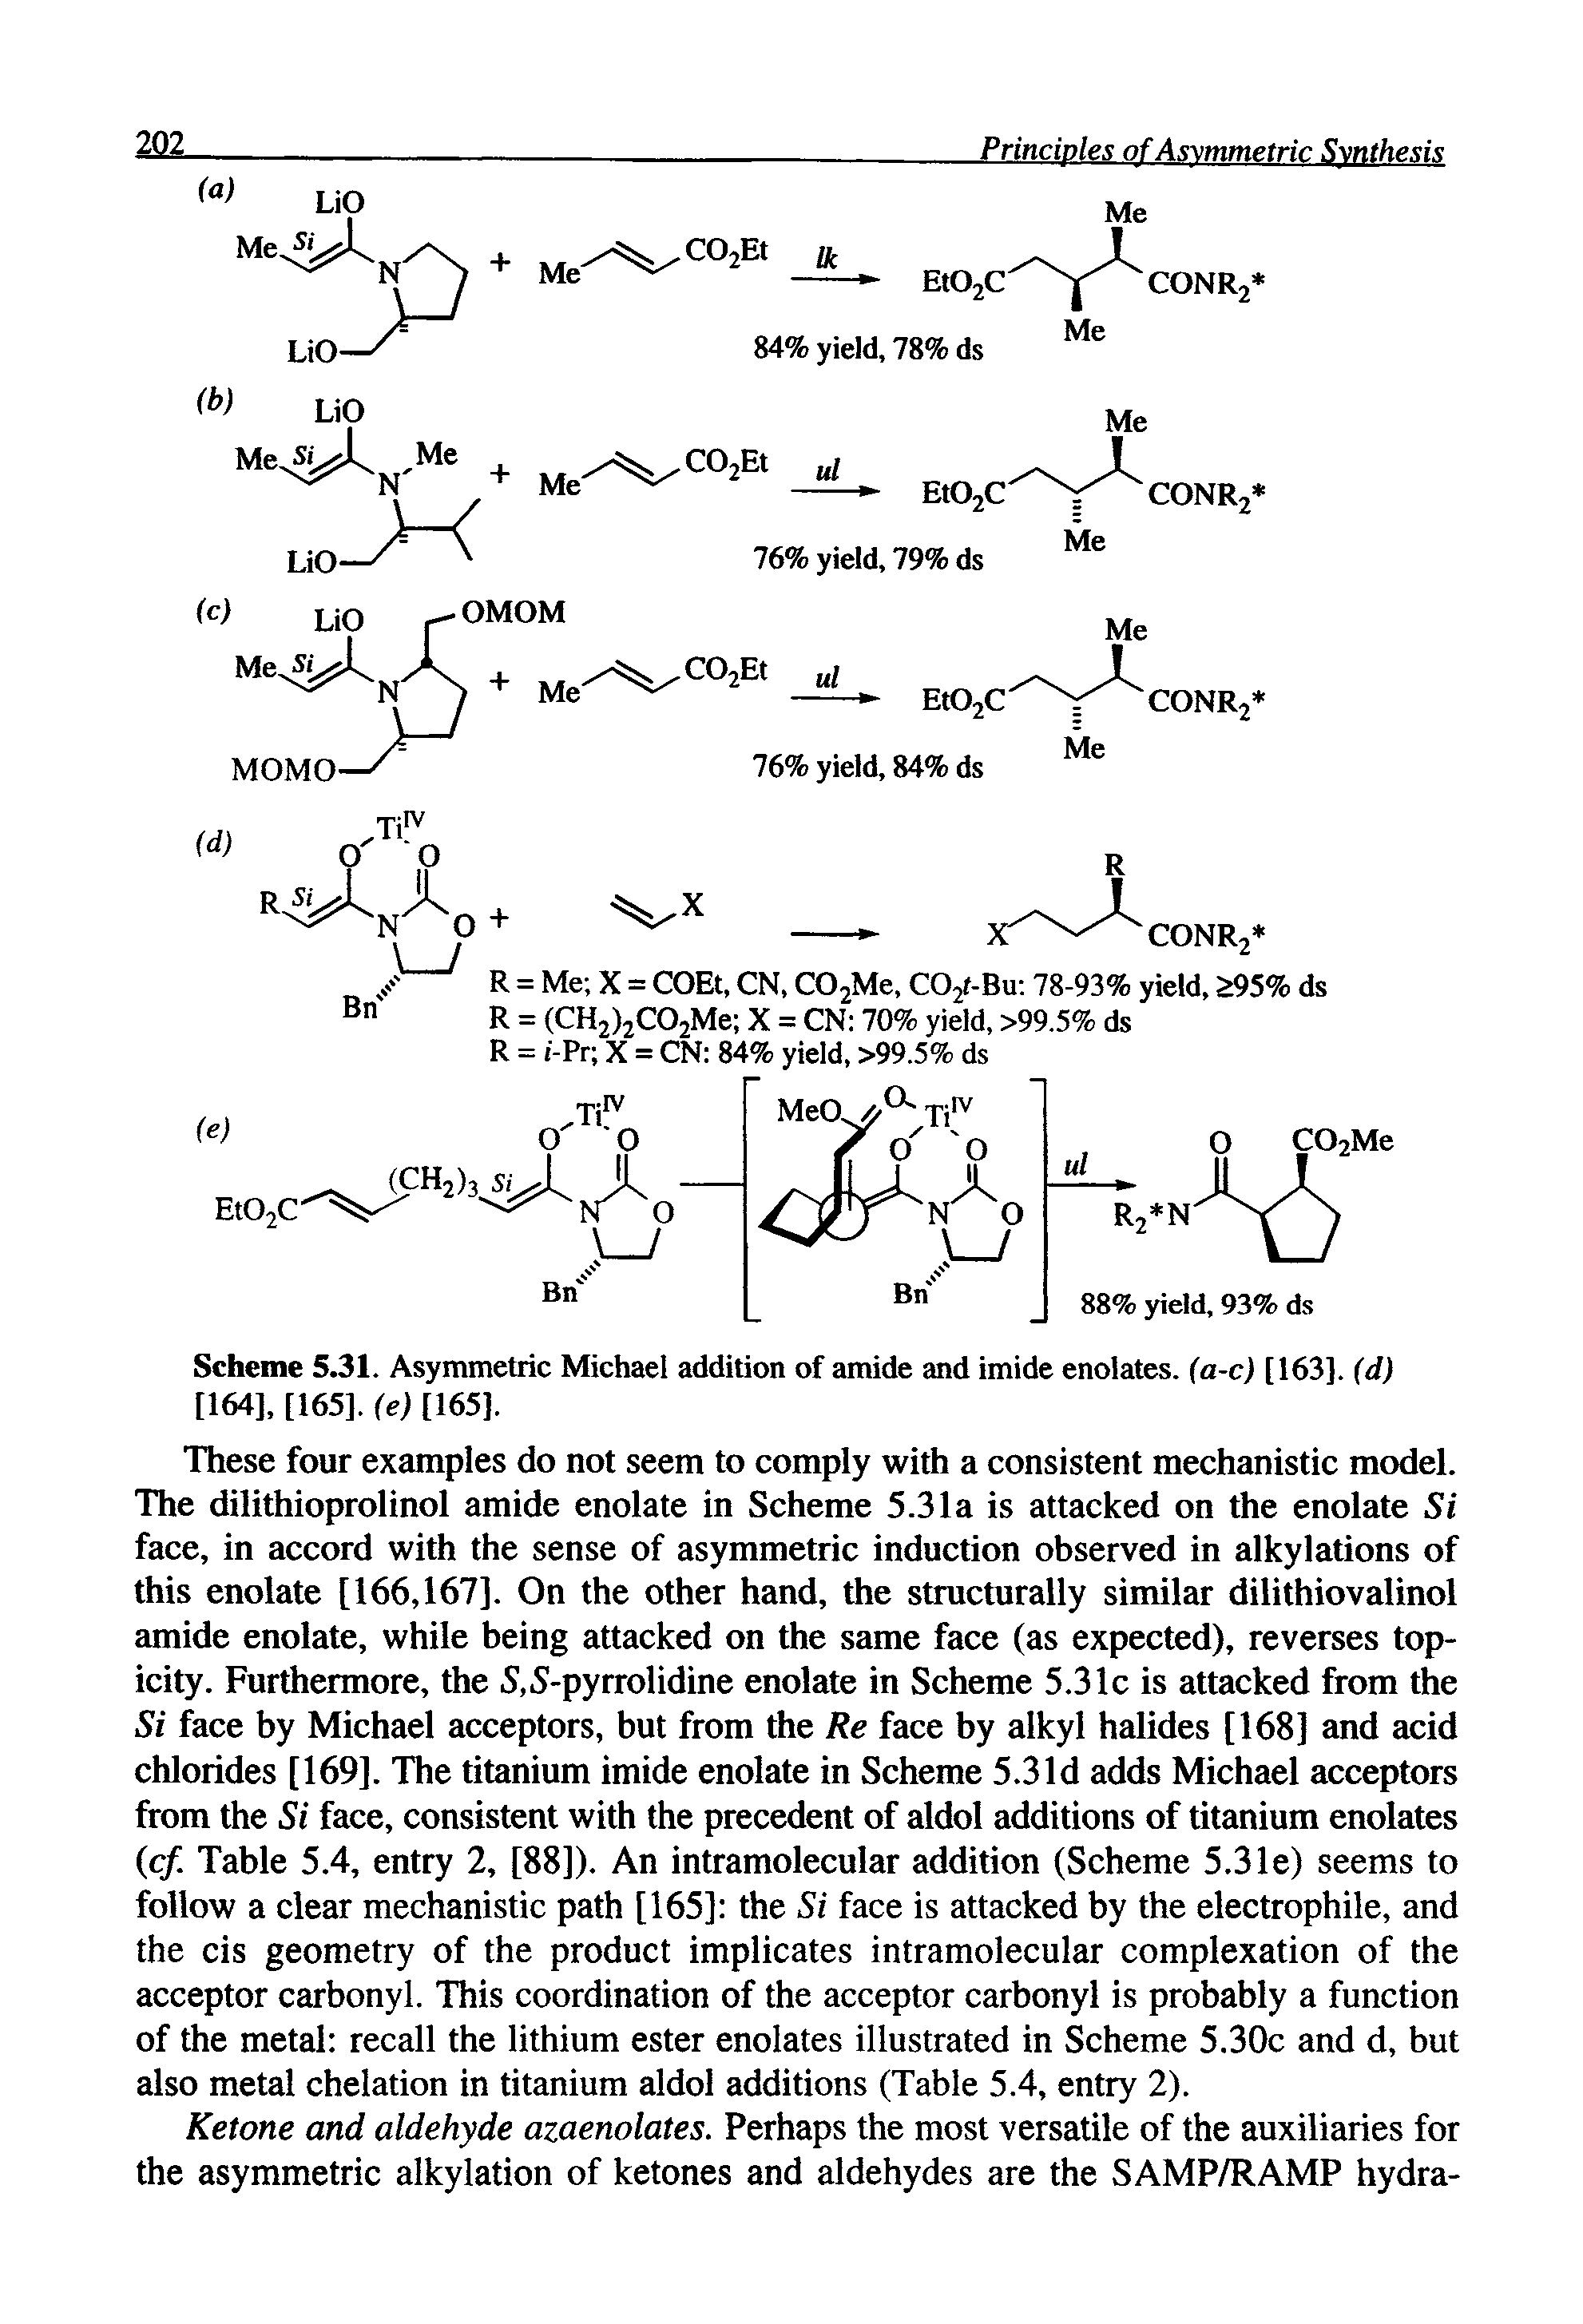 Scheme 5.31. Asymmetric Michael addition of amide and imide enolates. (a-c) [163]. (d)...